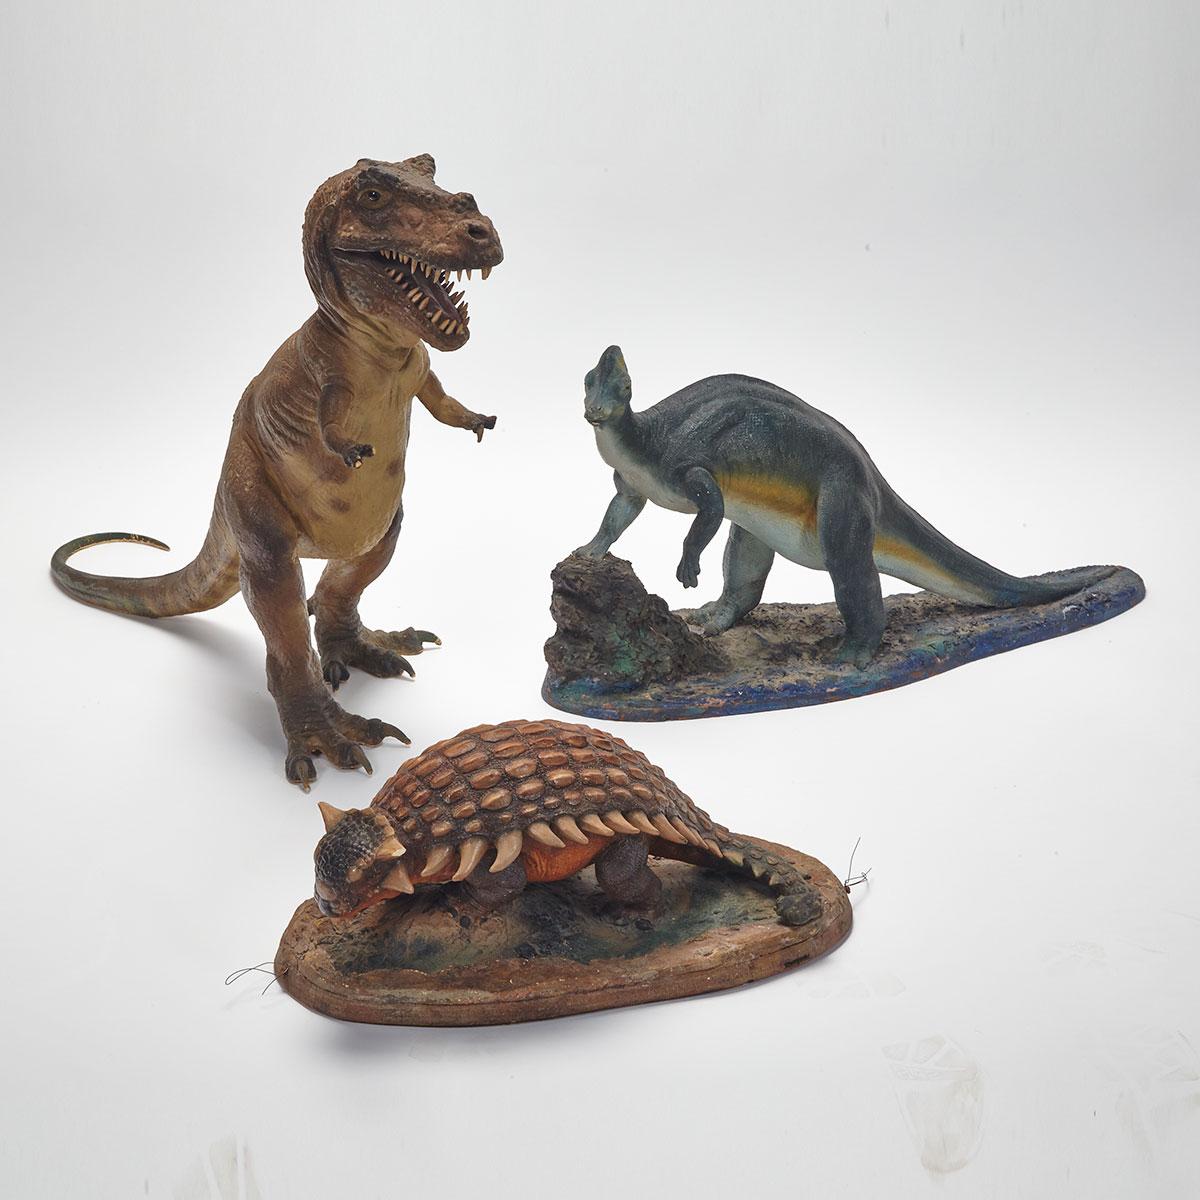 Three Painted Resin Models of Dinosaurs, 20th century